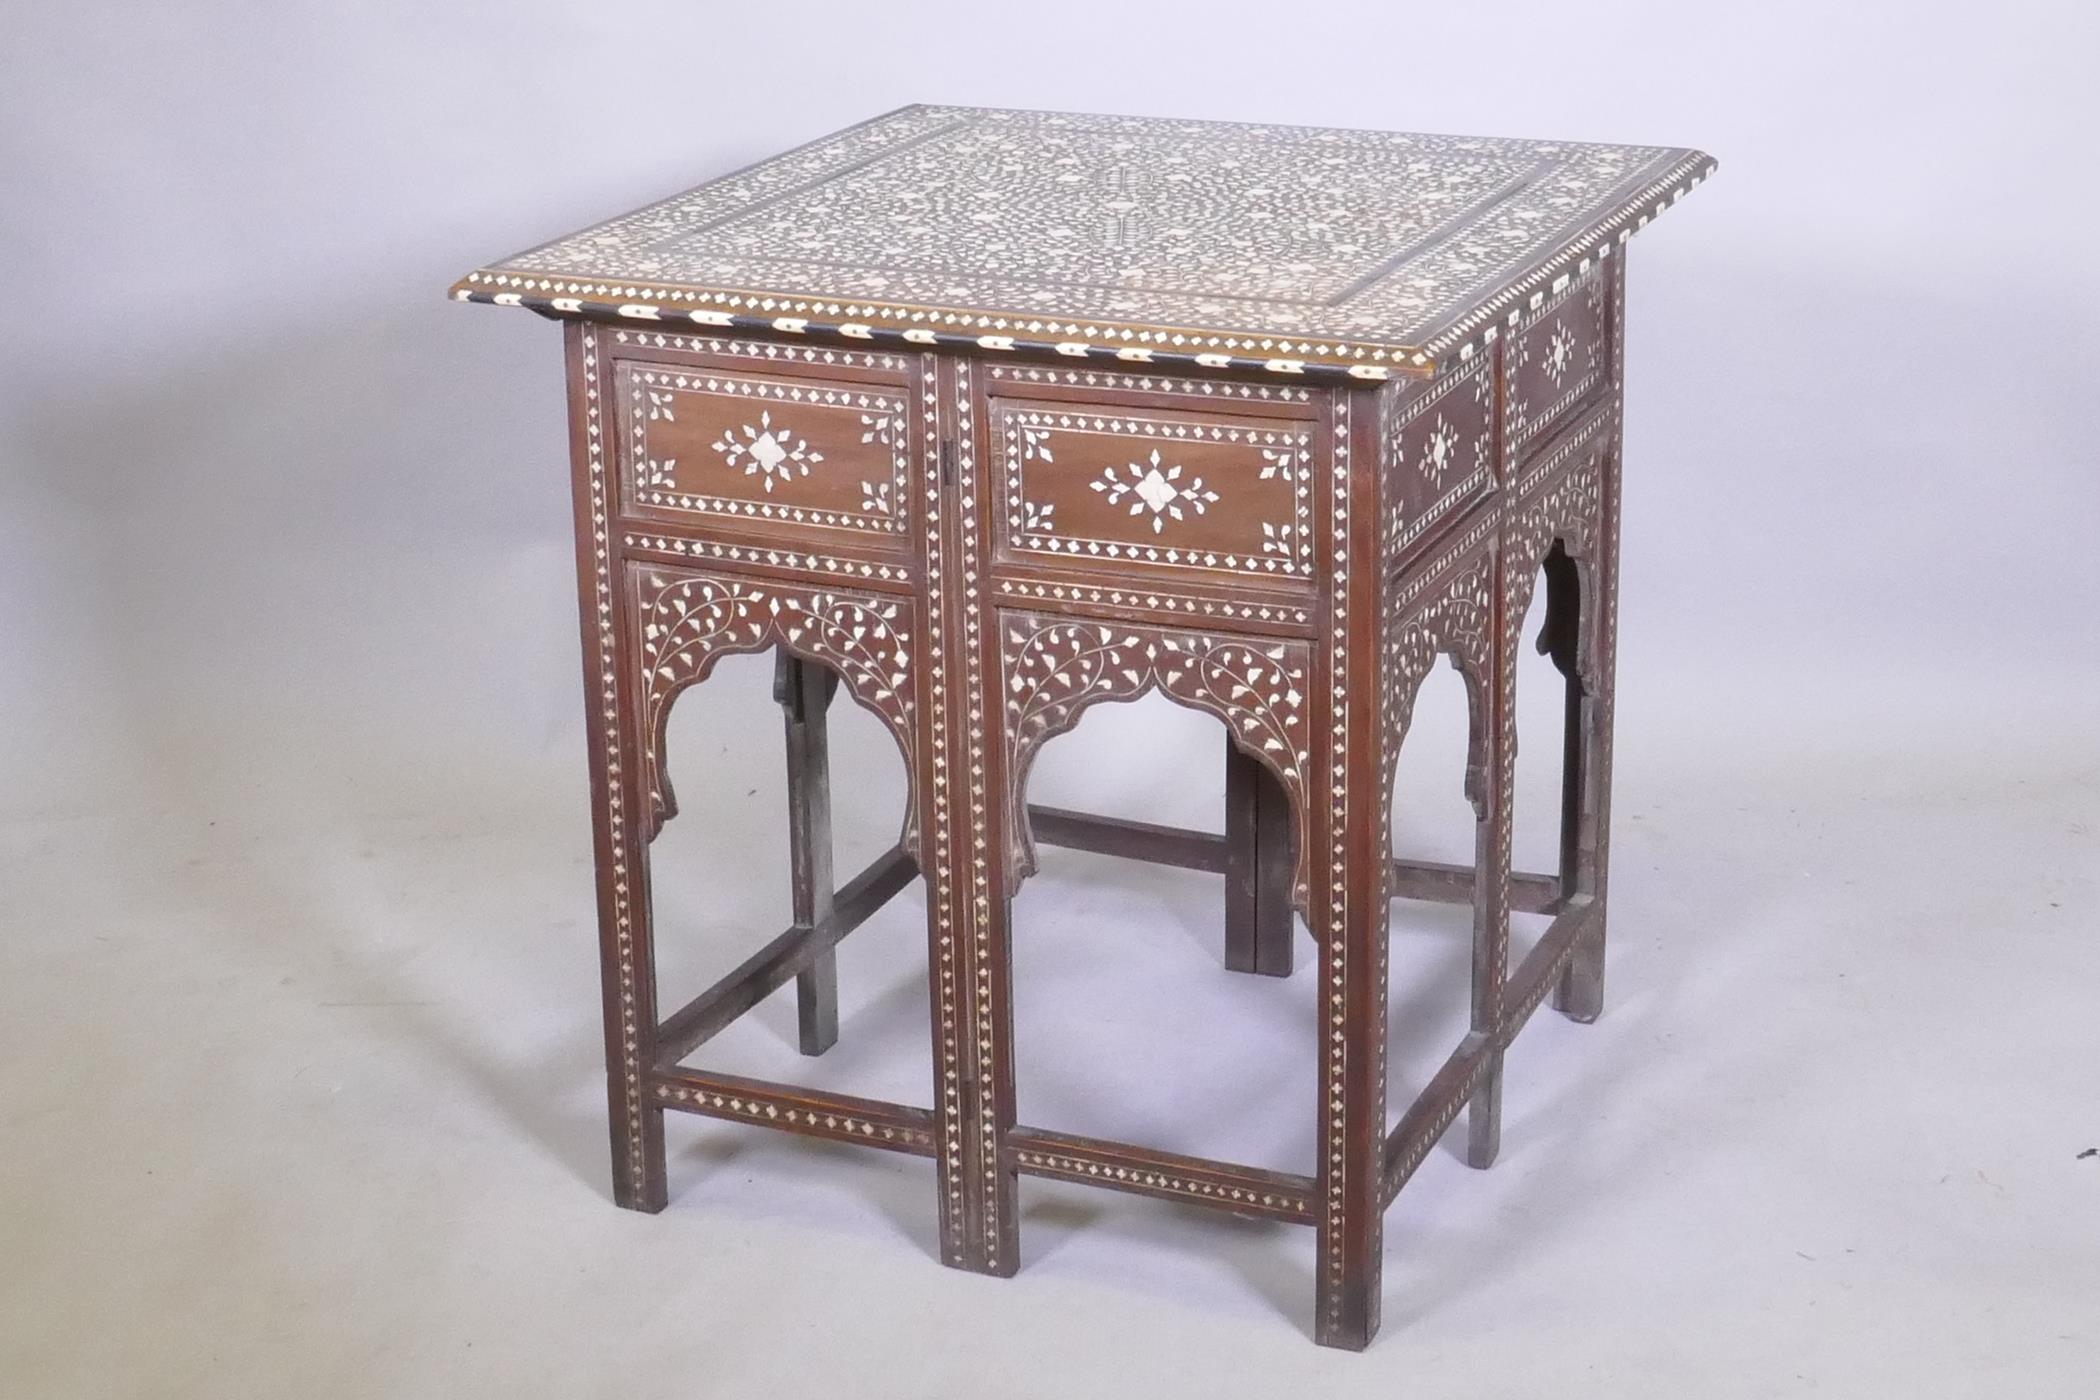 A C19th Moorish table with inlaid decoration and folding base, 61 x 61 x 63cm